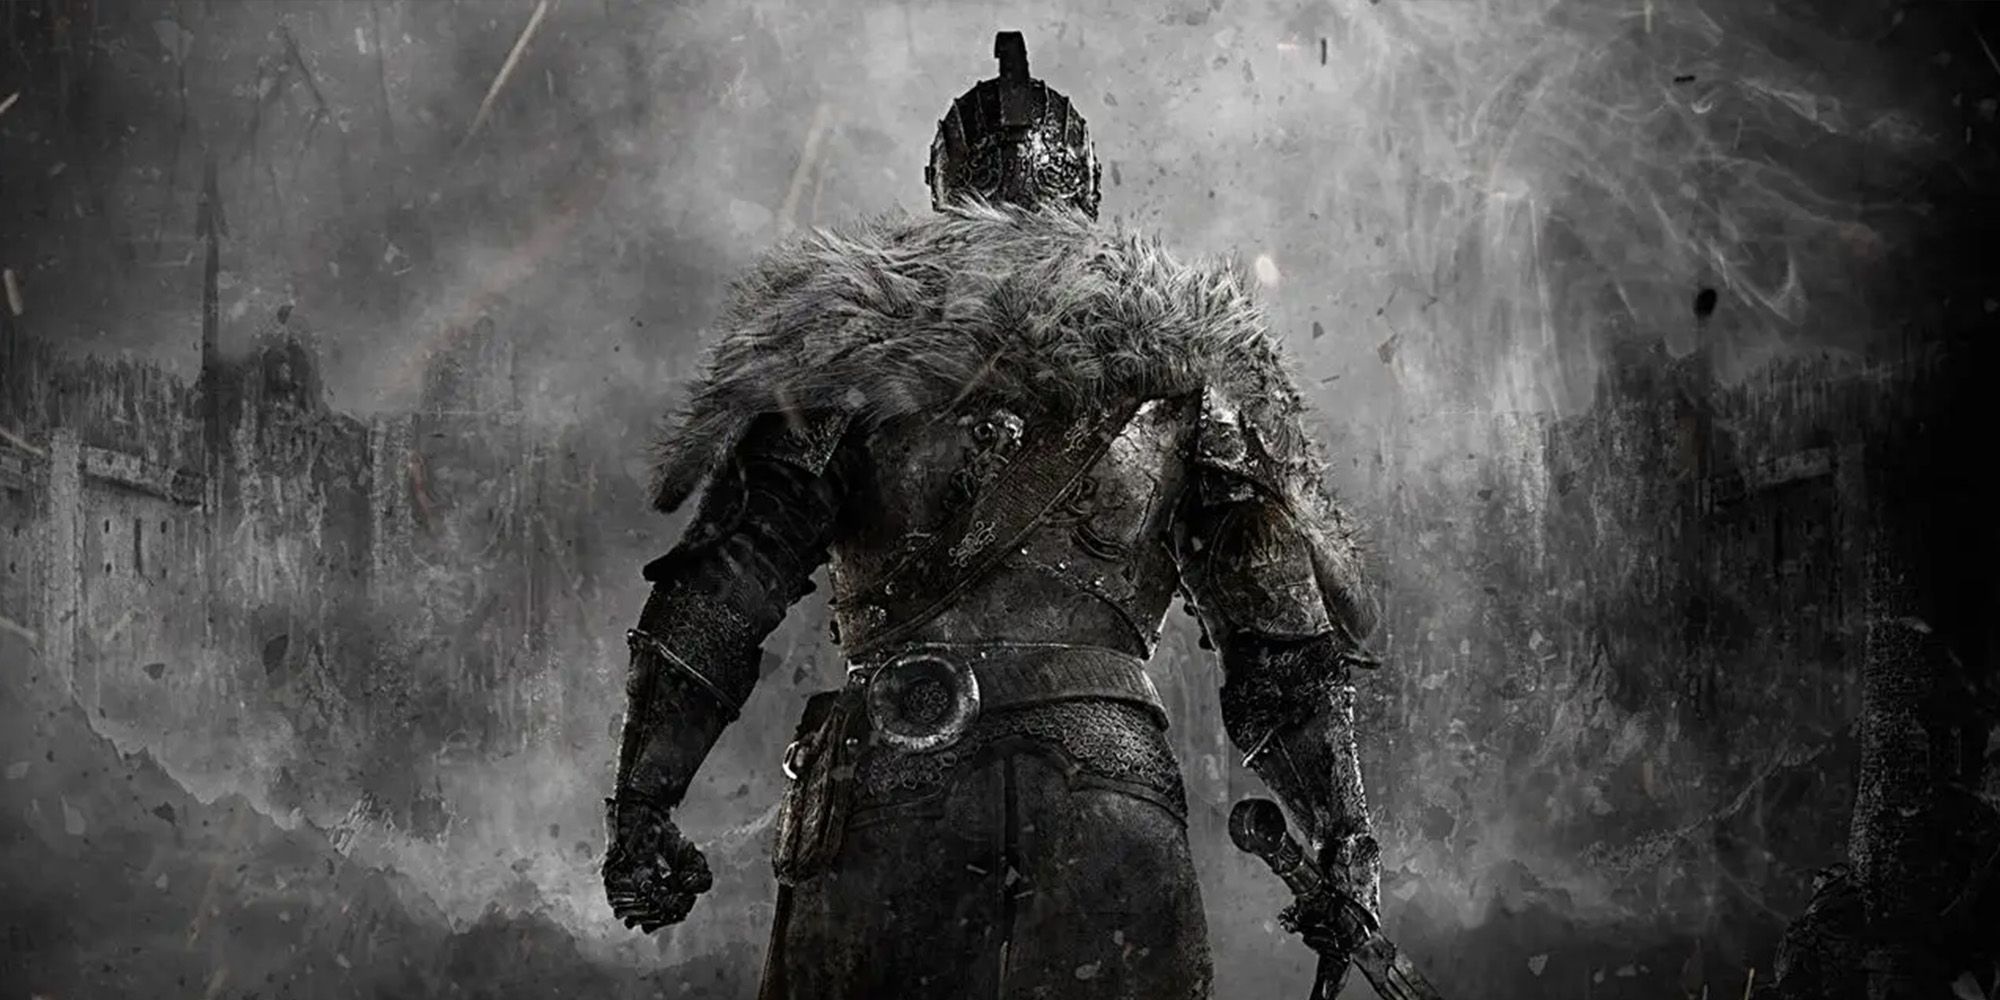 Key art of a knight in Dark Souls 2, from behind